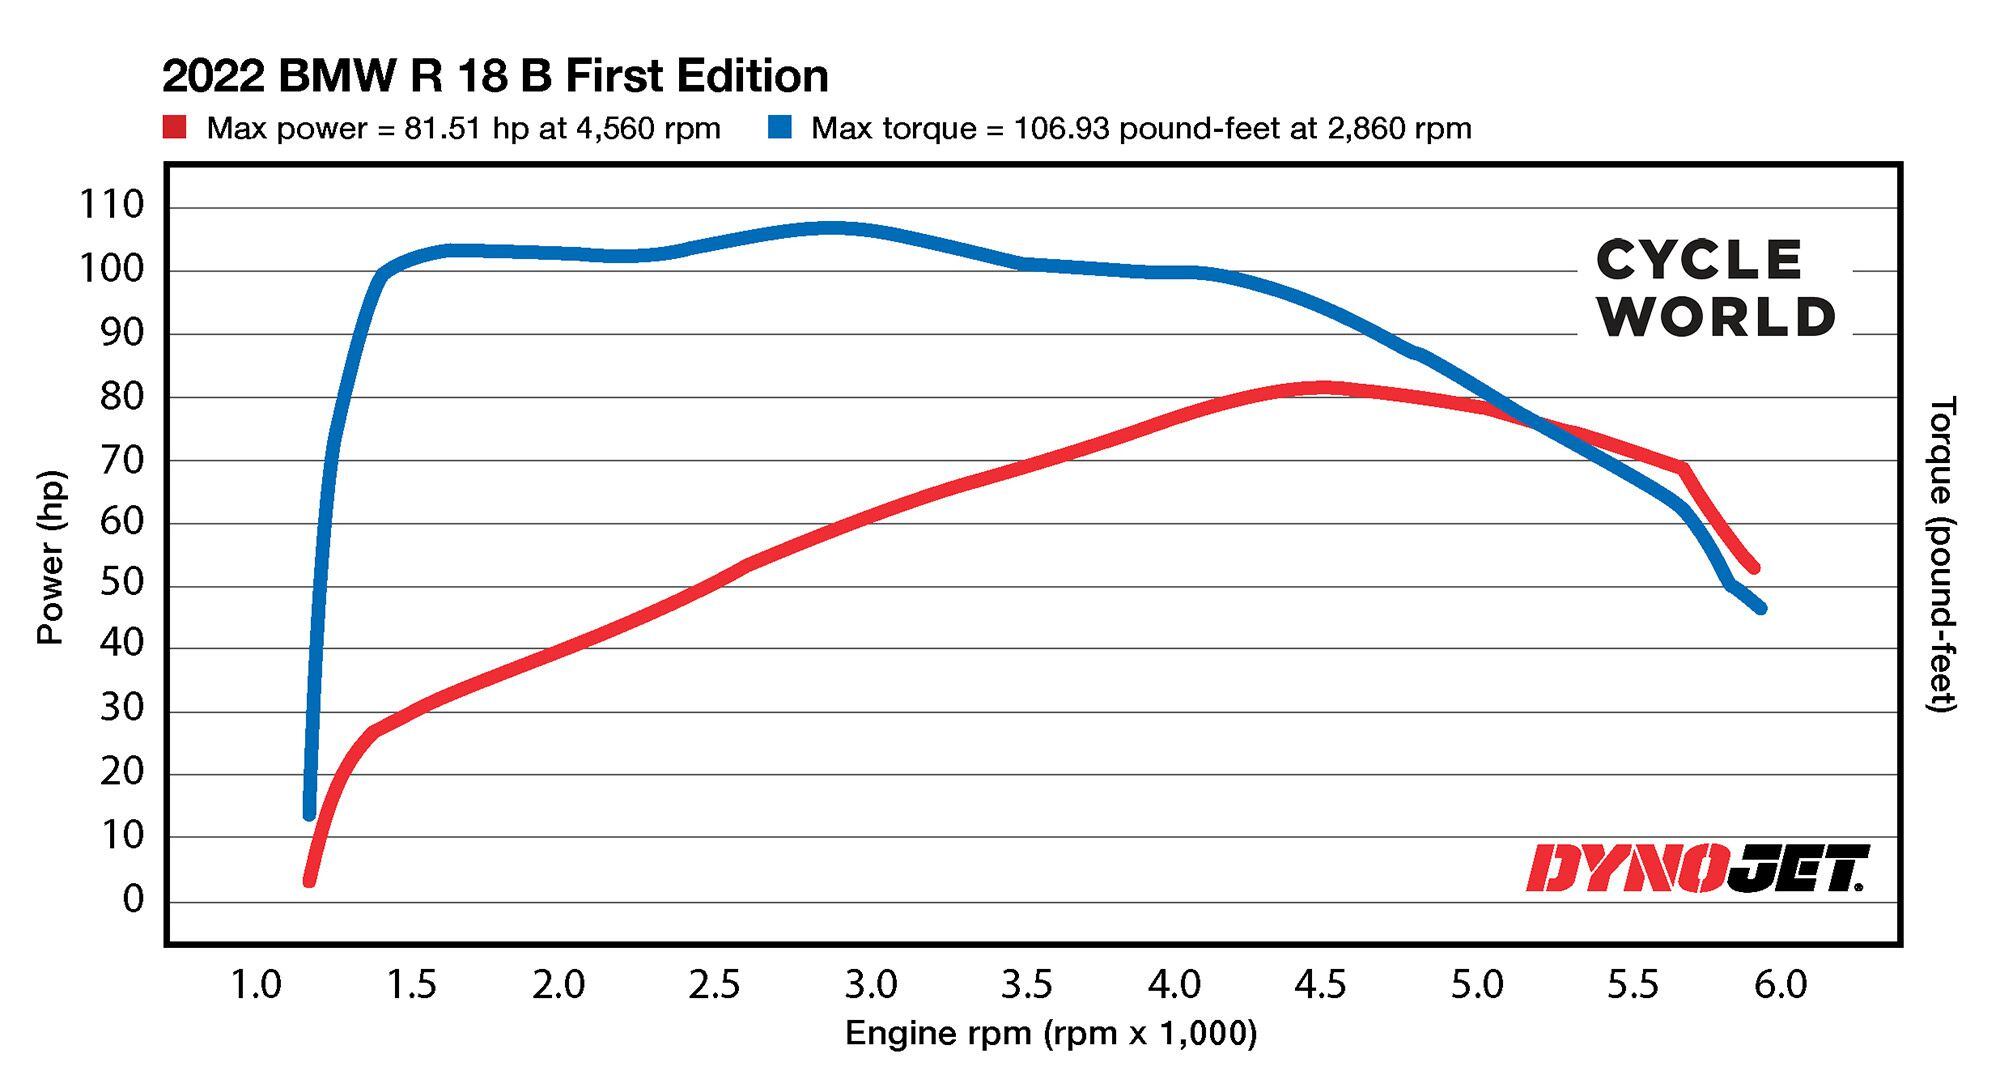 Horsepower and torque figures on the 2022 BMW R 18 B First Edition.